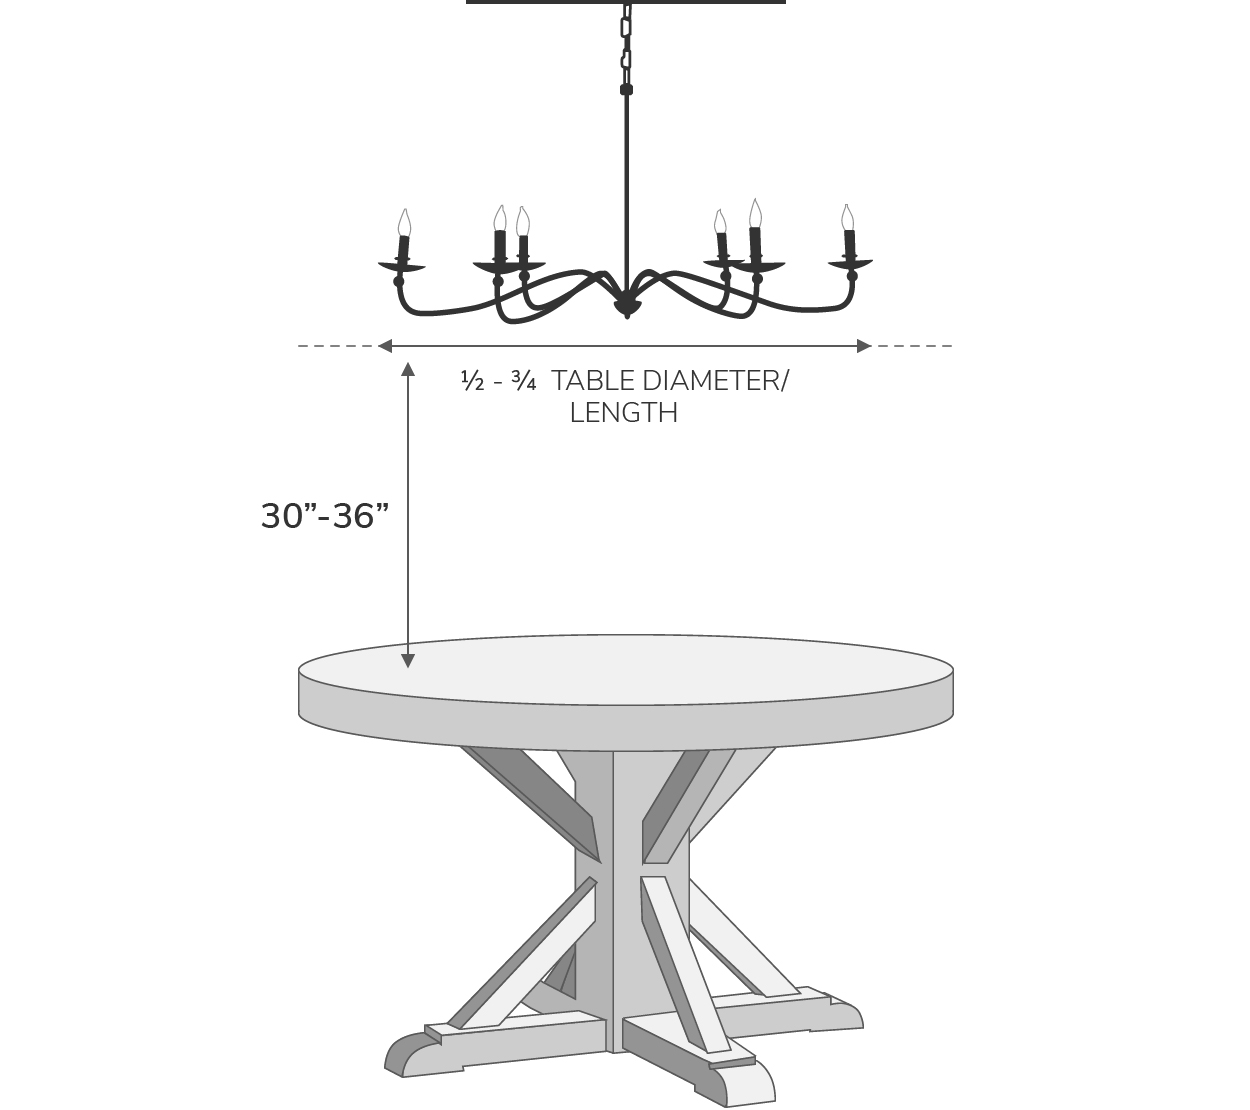 The Lighting Guide Pottery Barn, Dining Room Light Fixture Height Above Table